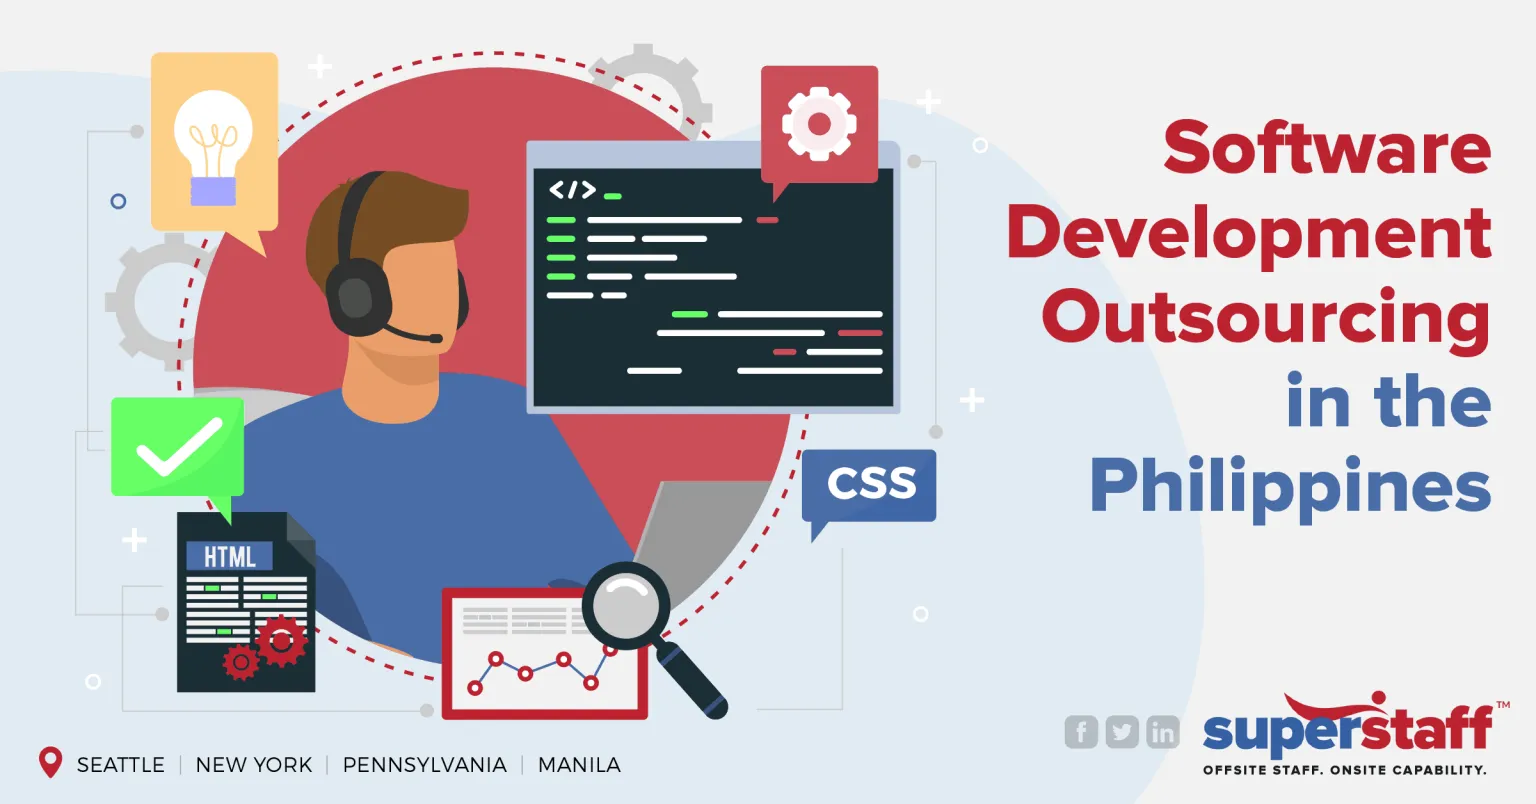 Software Development Outsourcing in the Philippines